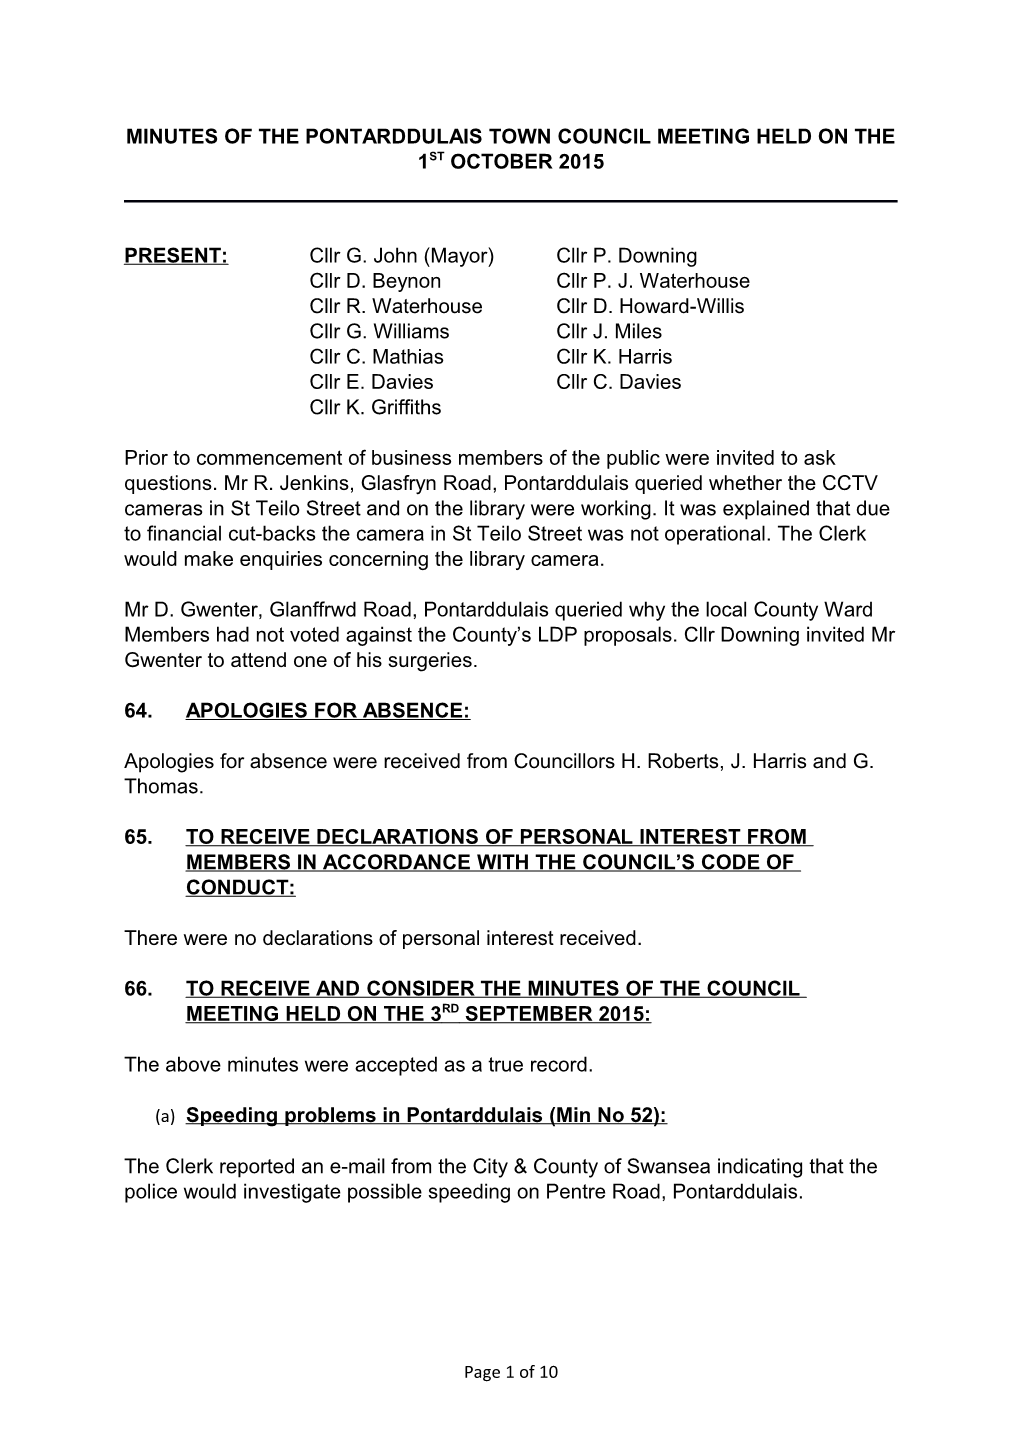 Minutes of the Pontarddulais Town Council Meeting Held on the 1St October 2015